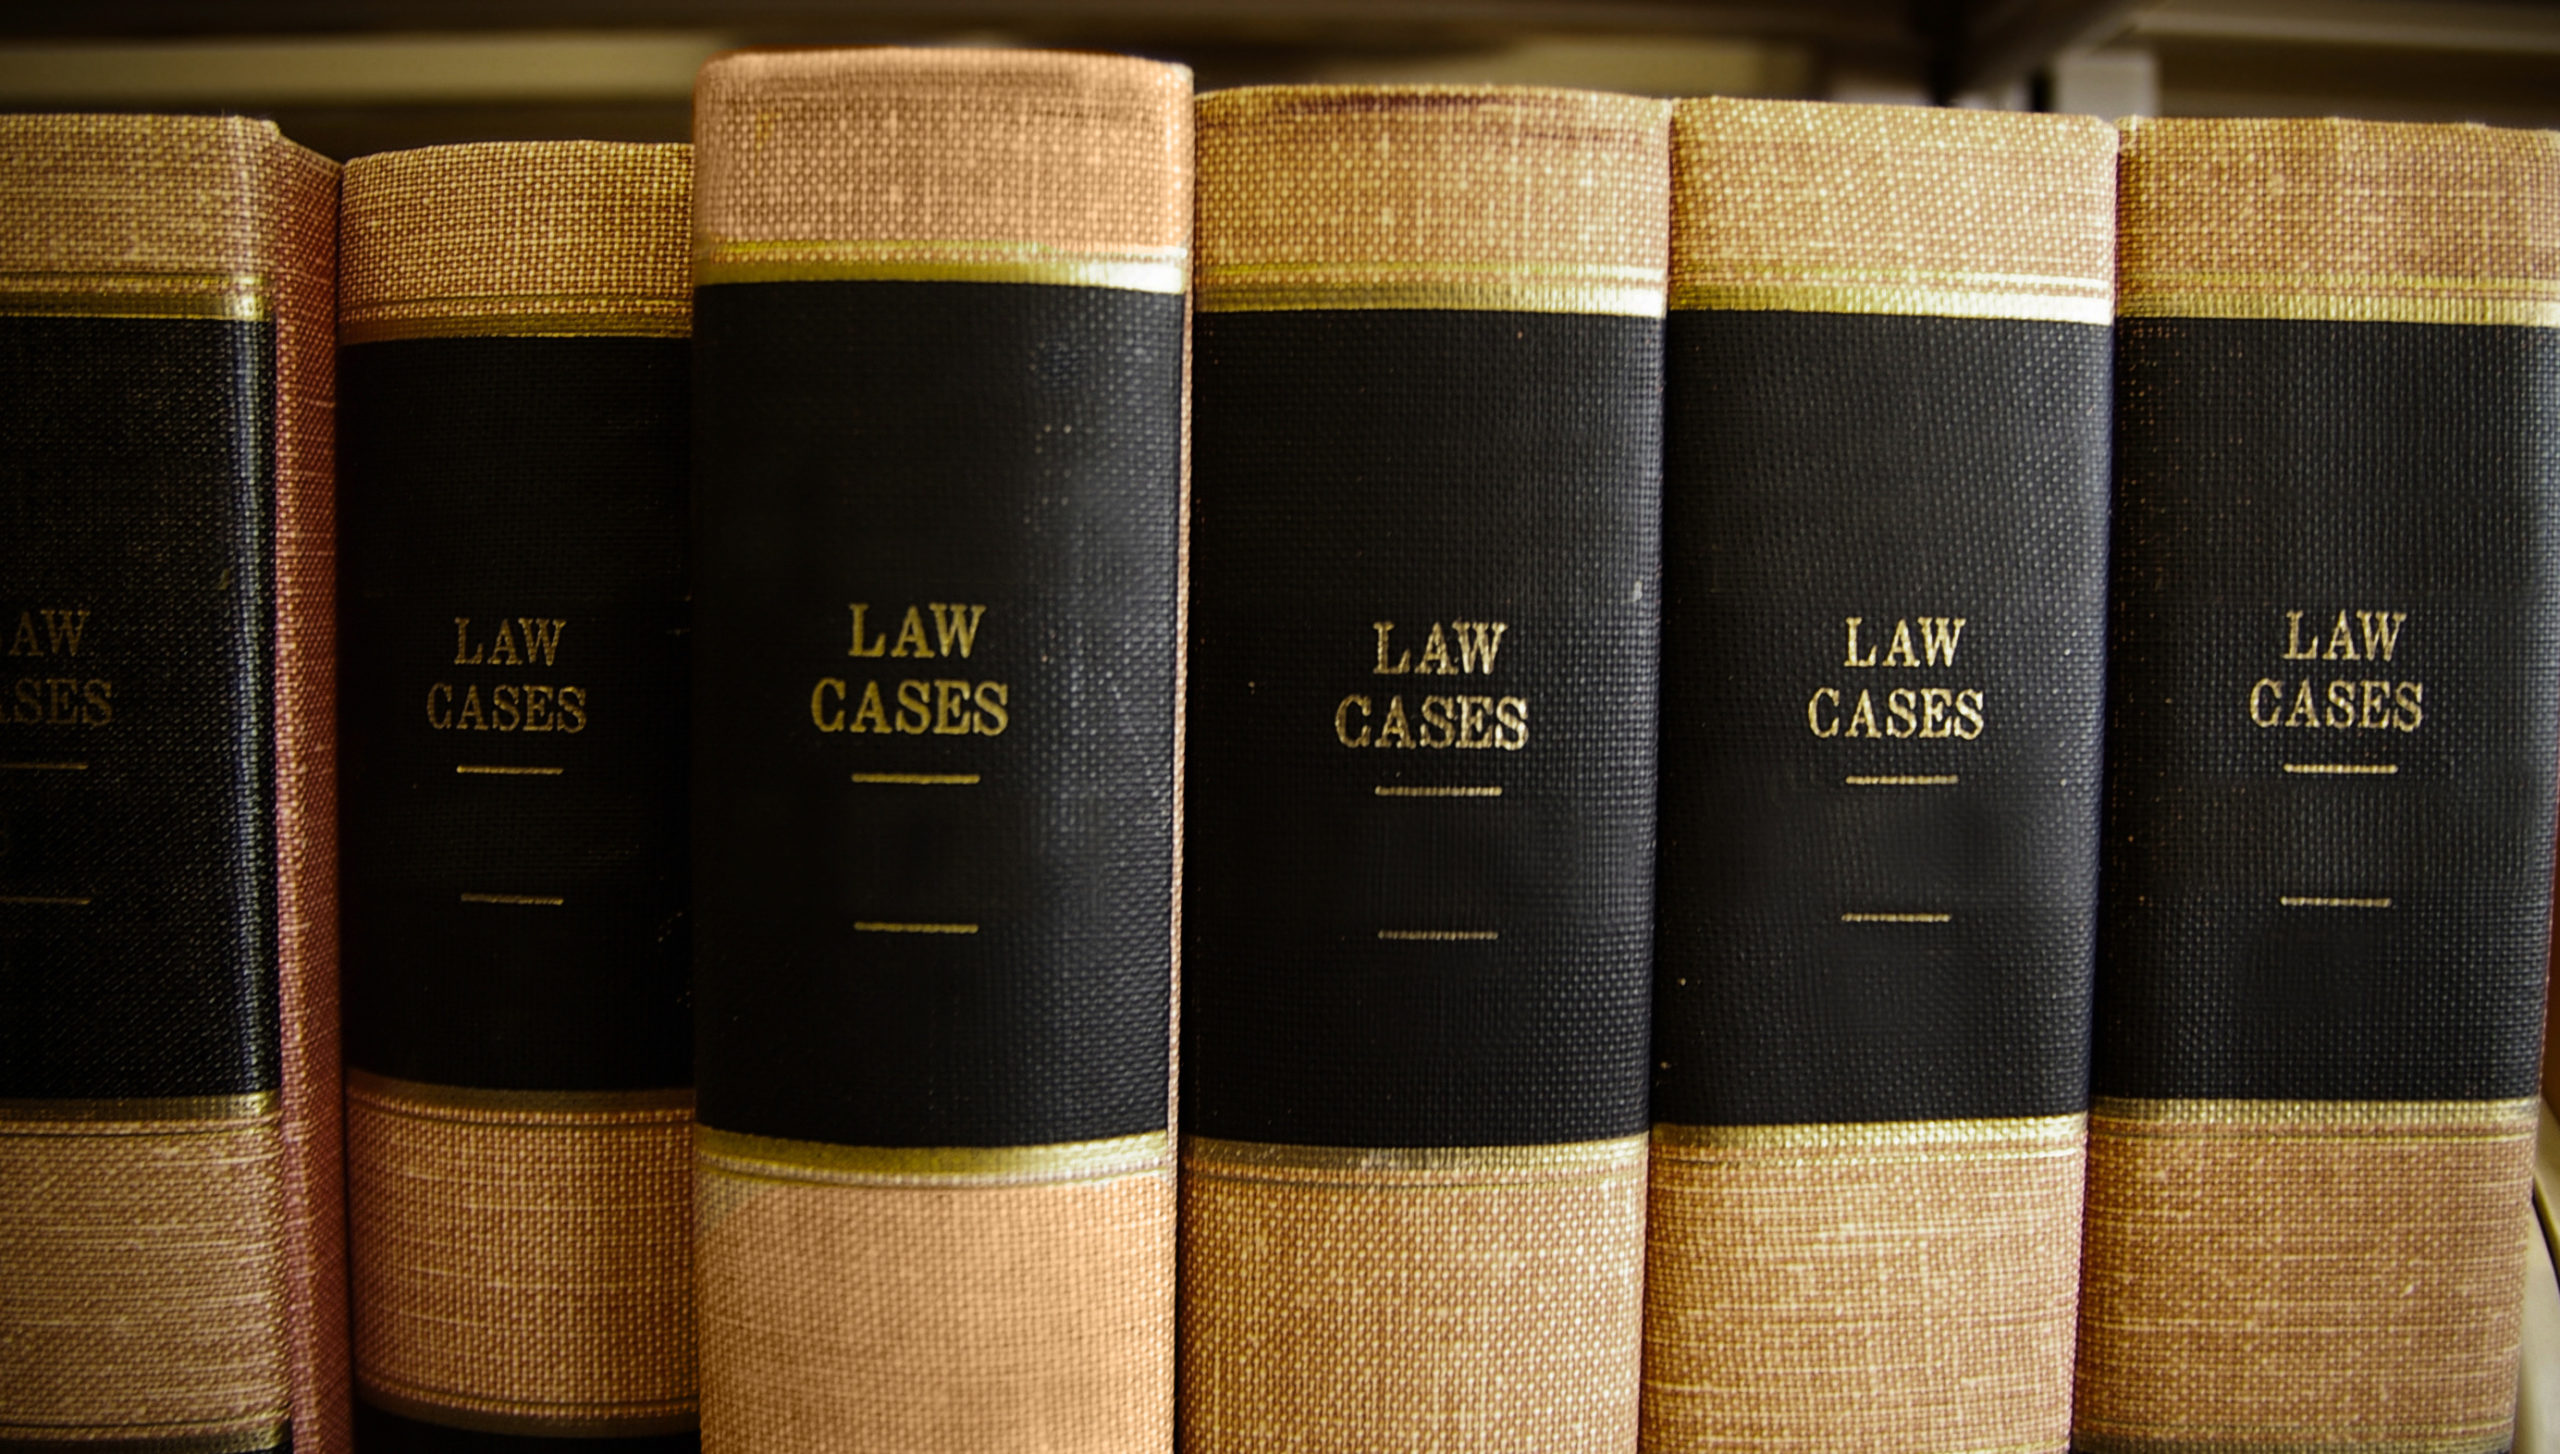 Blog - Law books in a row